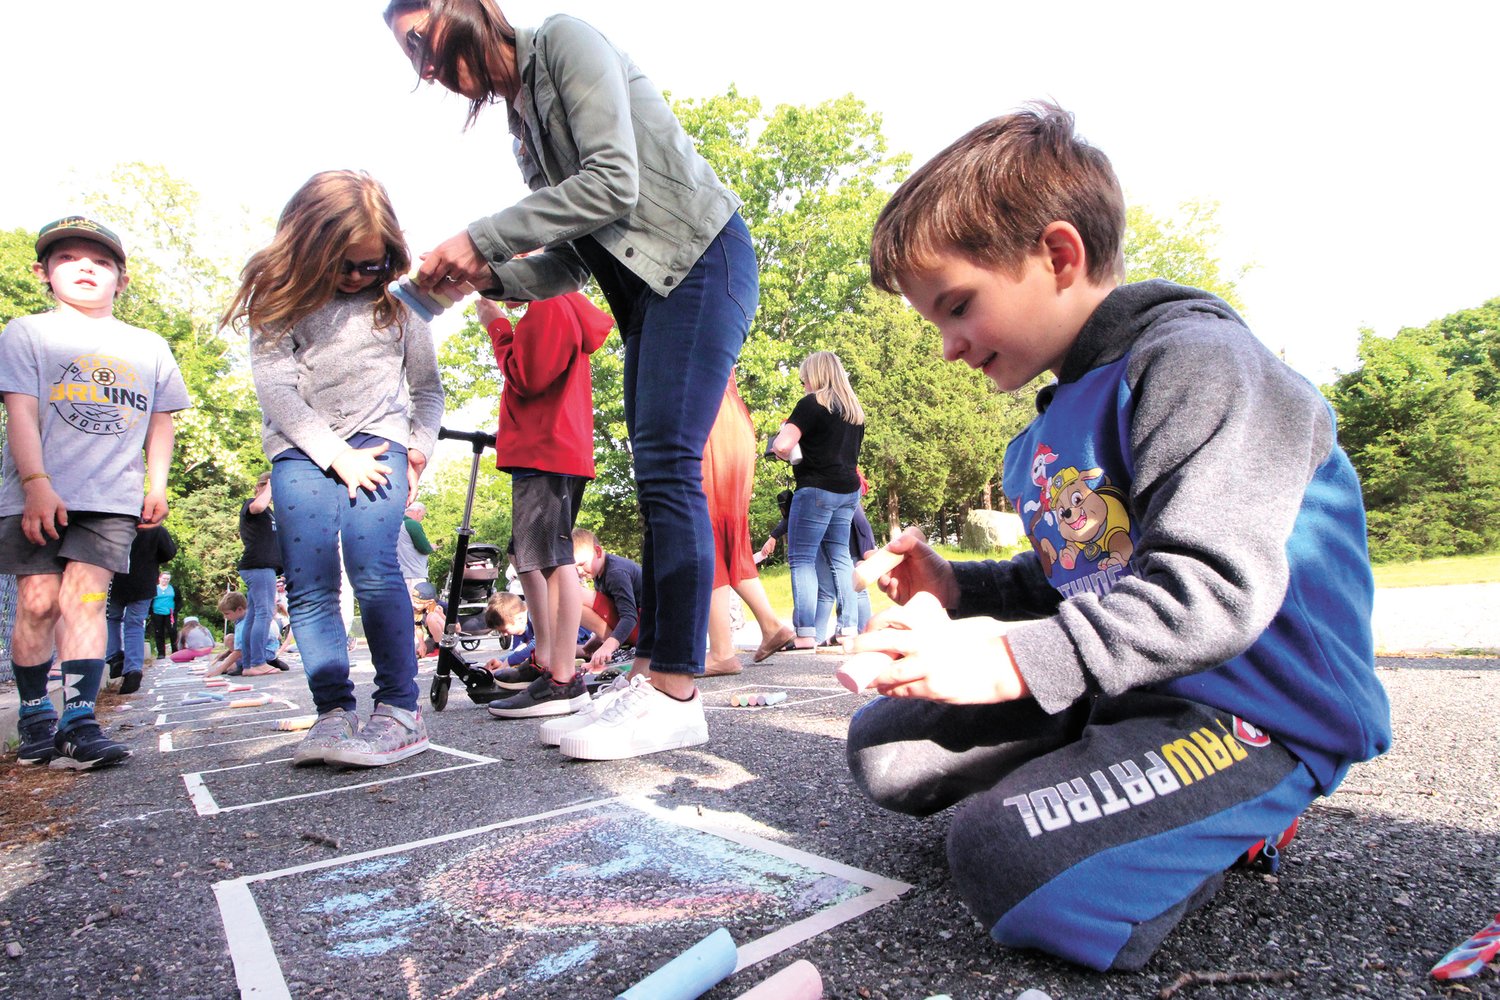 TALENT IN ACTION: As an activity of Arts Night, students registered to draw in chalk a creation of their imagination on numbered sidewalk panels with the prospect of having their work picked for prizes.  Kindergartner Lukas Heimiller took the challenge seriously, diligently applying himself to the admiration of onlookers.